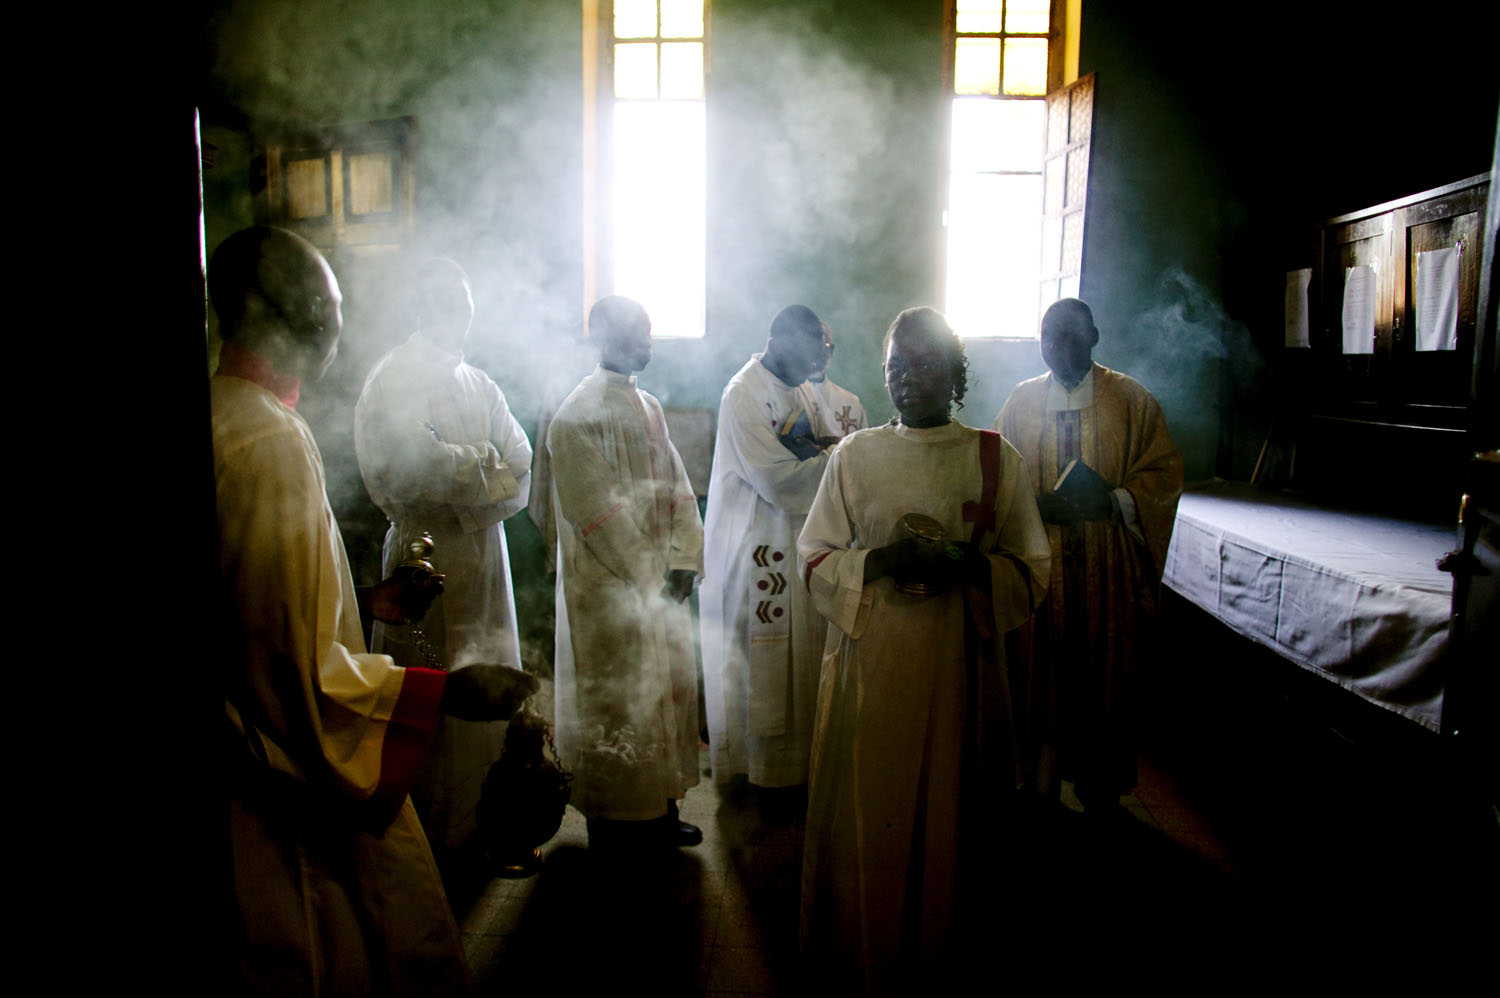 April 24, 2011. Southern Sudanese Catholics prepare for Easter mass in Wau, the south's second largest city. Christianity is a vital component of southern identity and was significant source of conflict between southern tribes and the northern, Islamic government in Khartoum. The north's historic imposition of Islamic law throughout the south was a grievance that helped to galvanize the southern liberation movement.